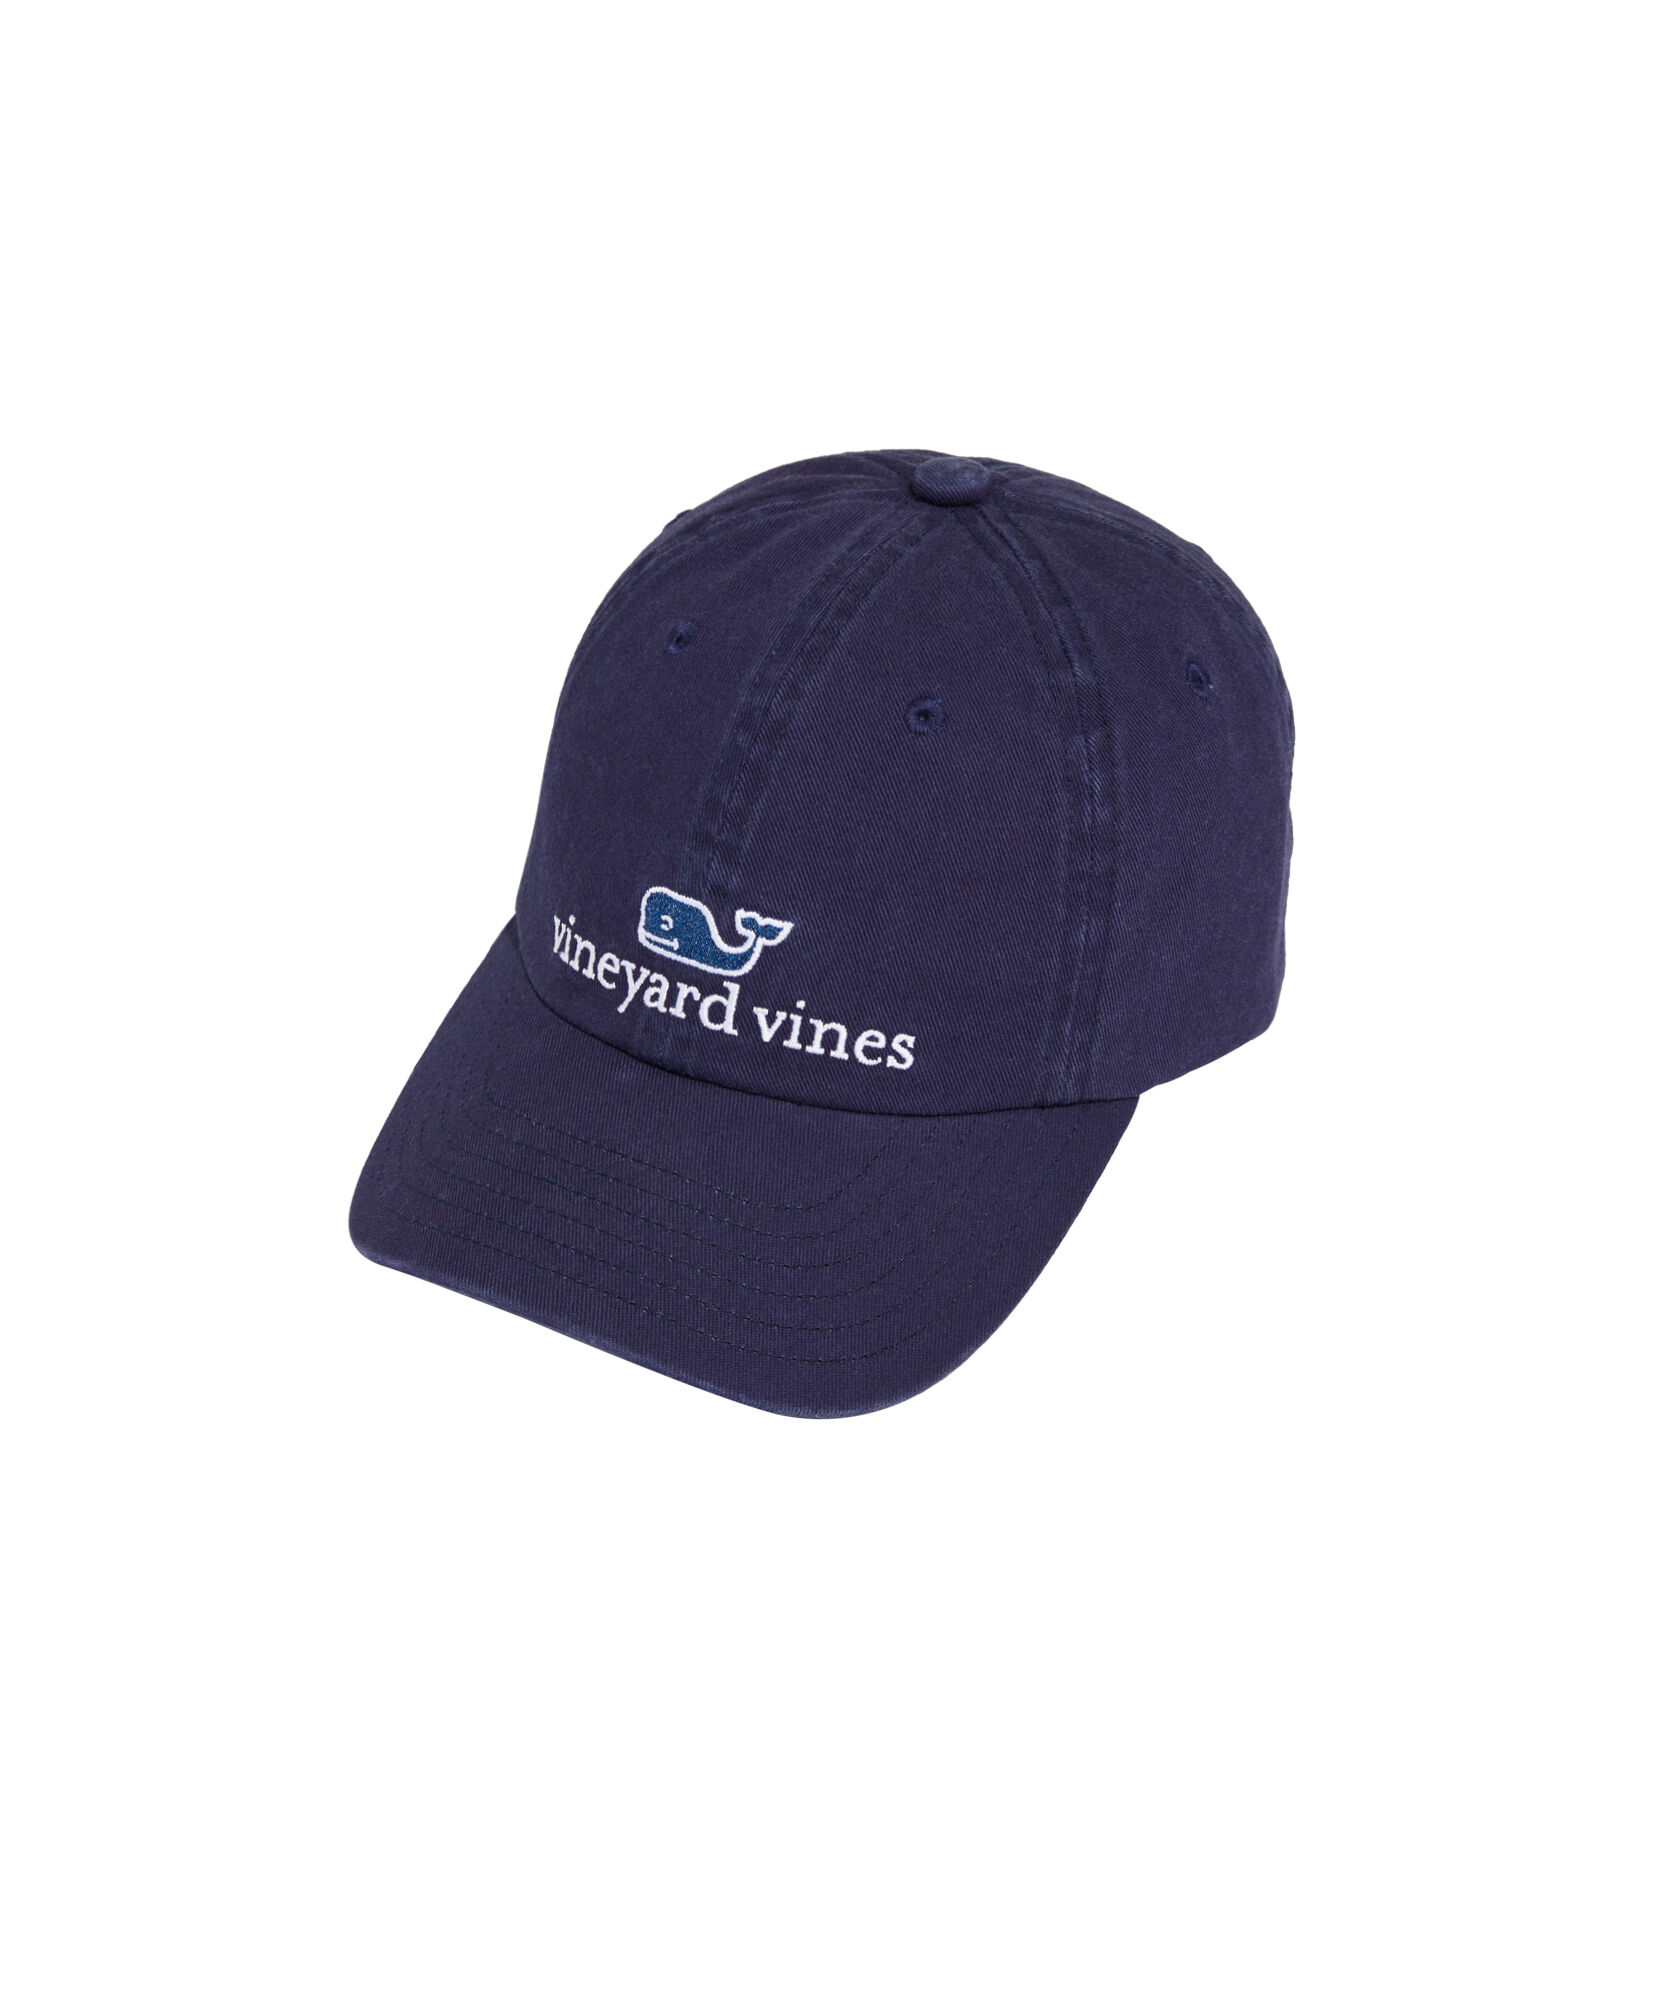 OUTLET Boys' Classic Baseball Hat